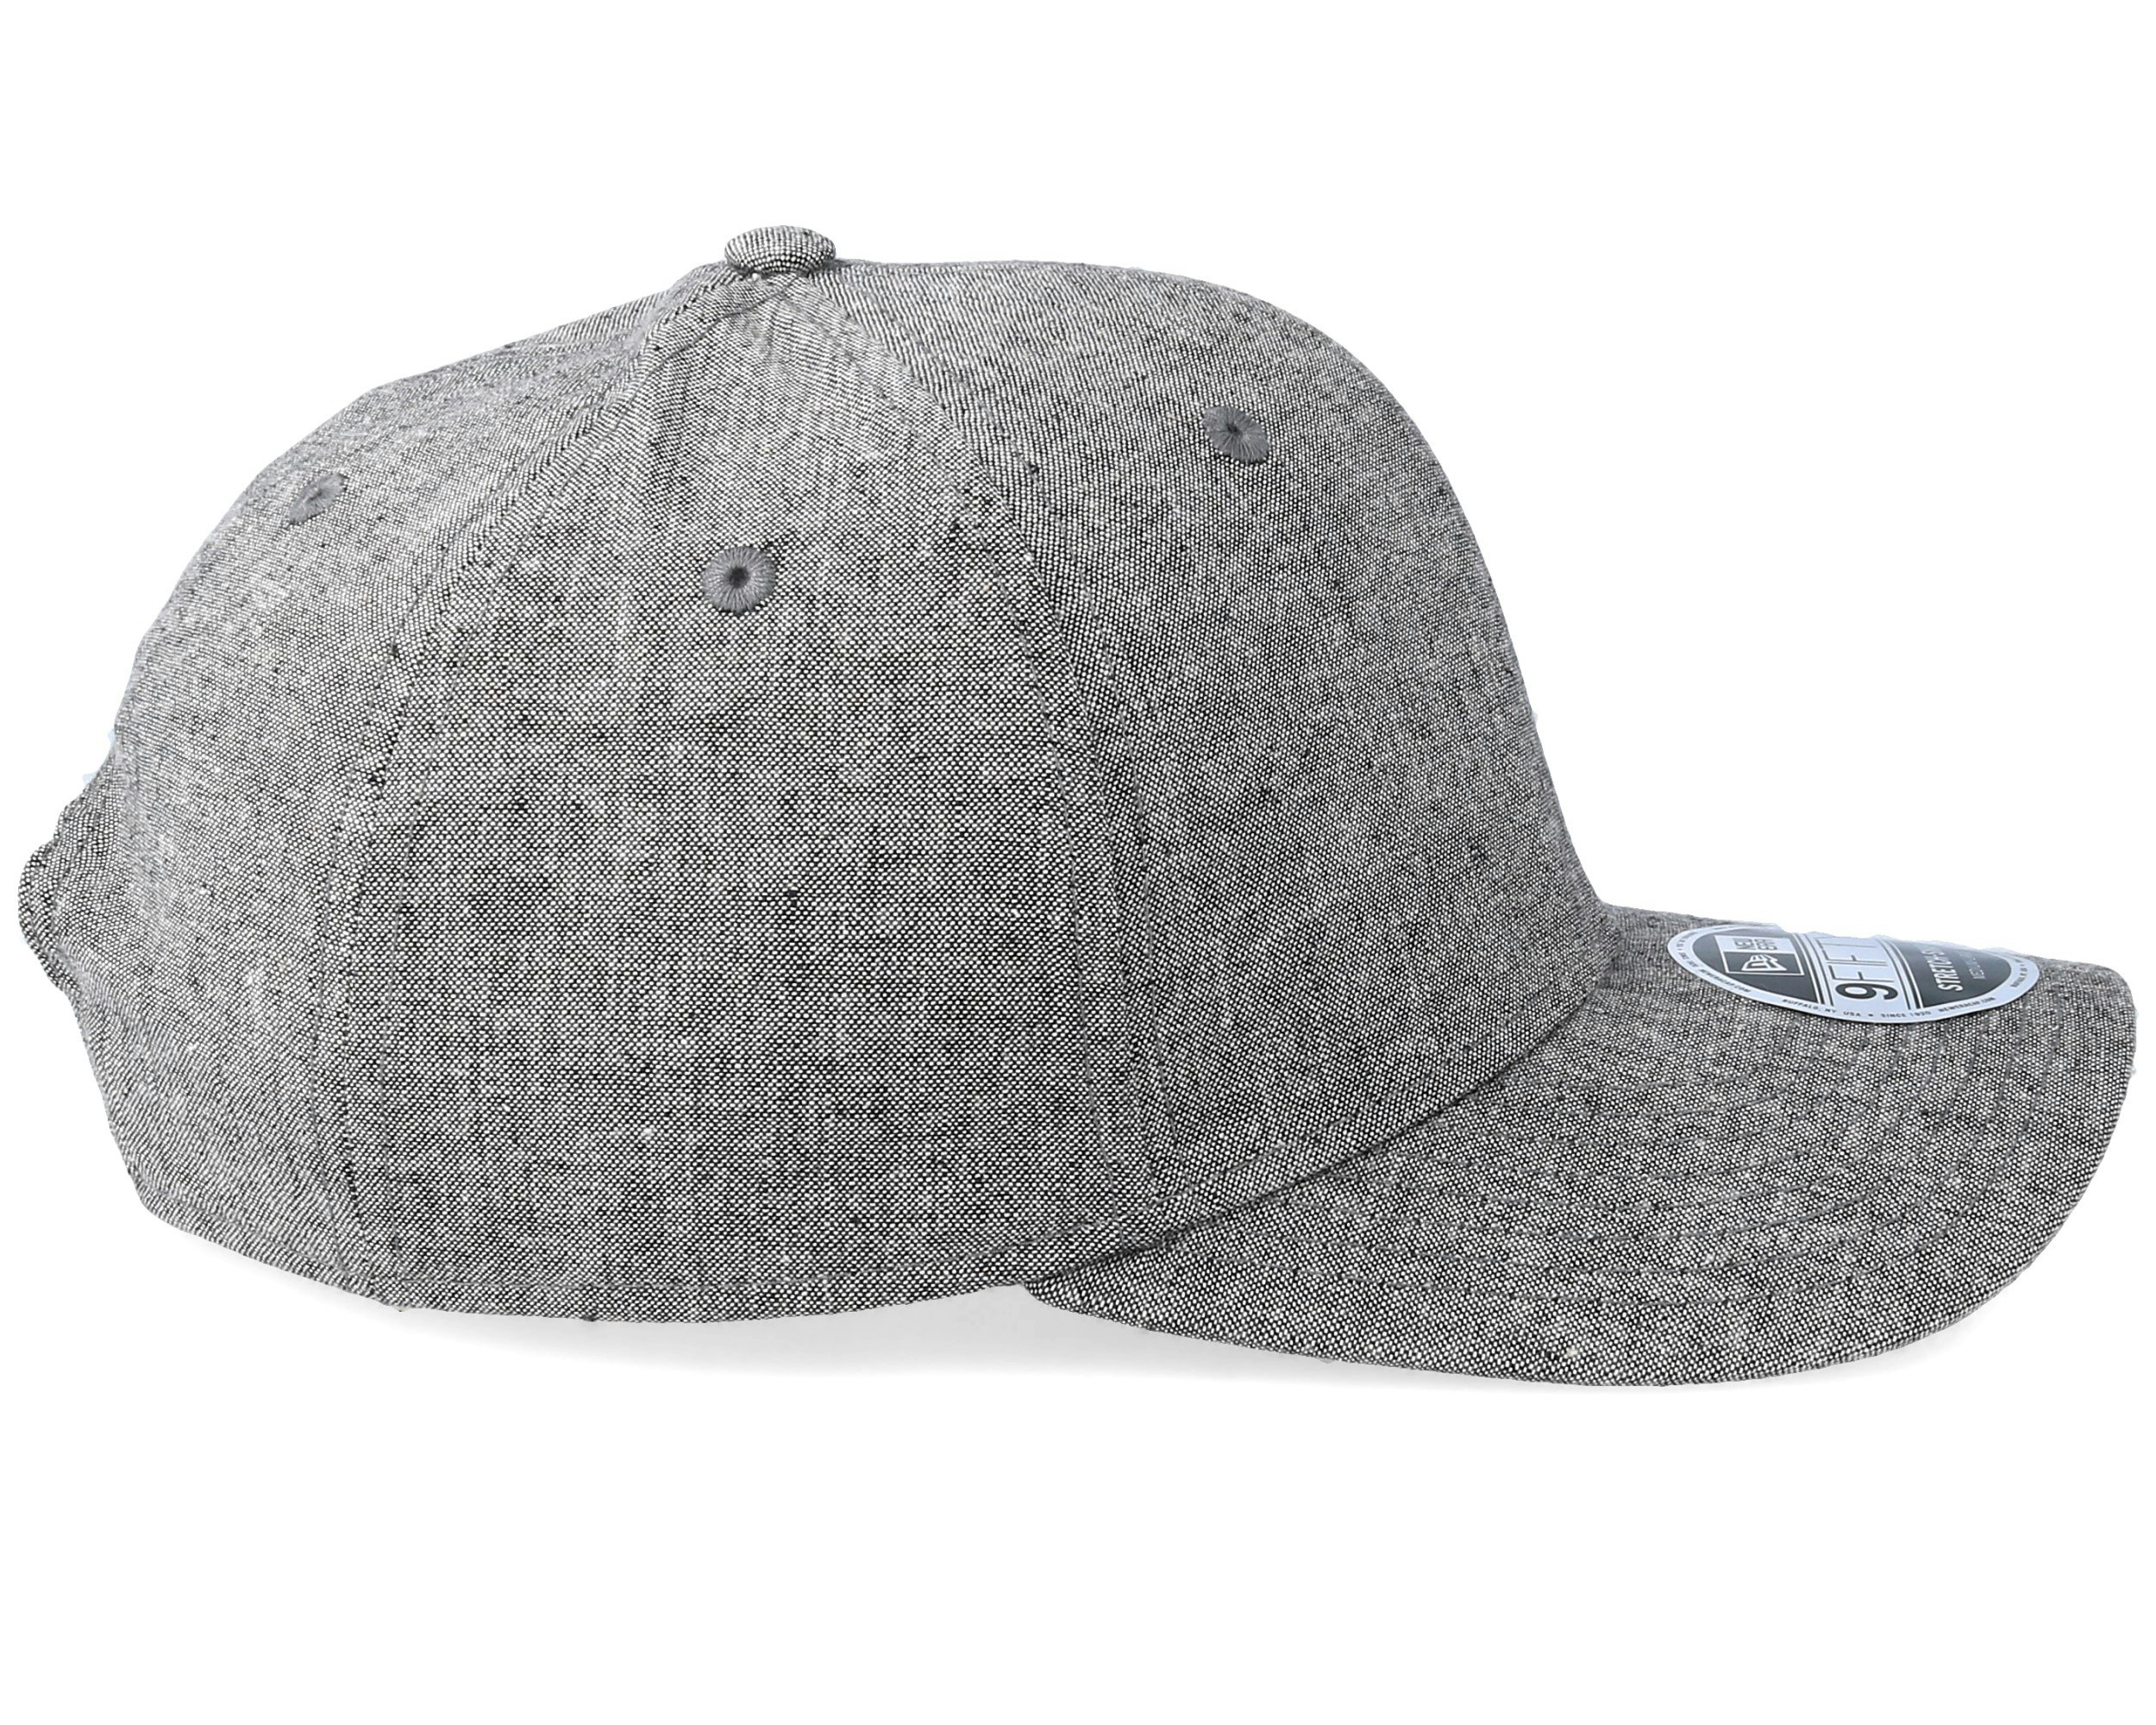 New Era Stretch Snap 9fifty Chambray Linen Heather grey Cap All Sizes S/M M/L